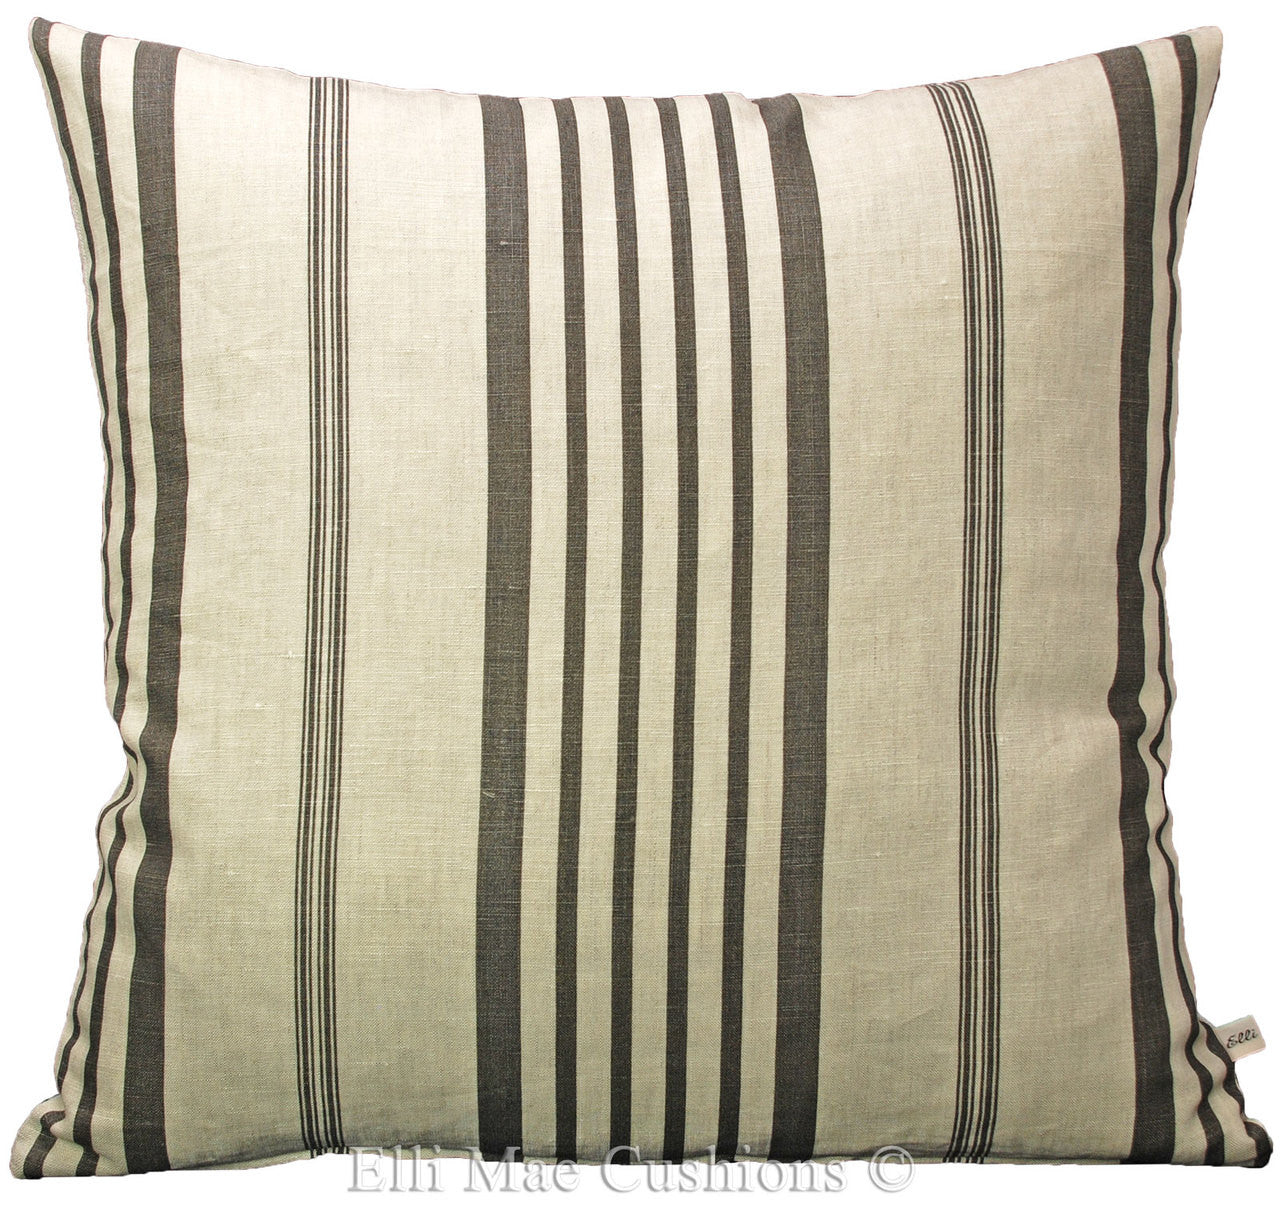 Cabbages and Roses Designer Linen Jolly Stripe Black Cushion Pillow Cover